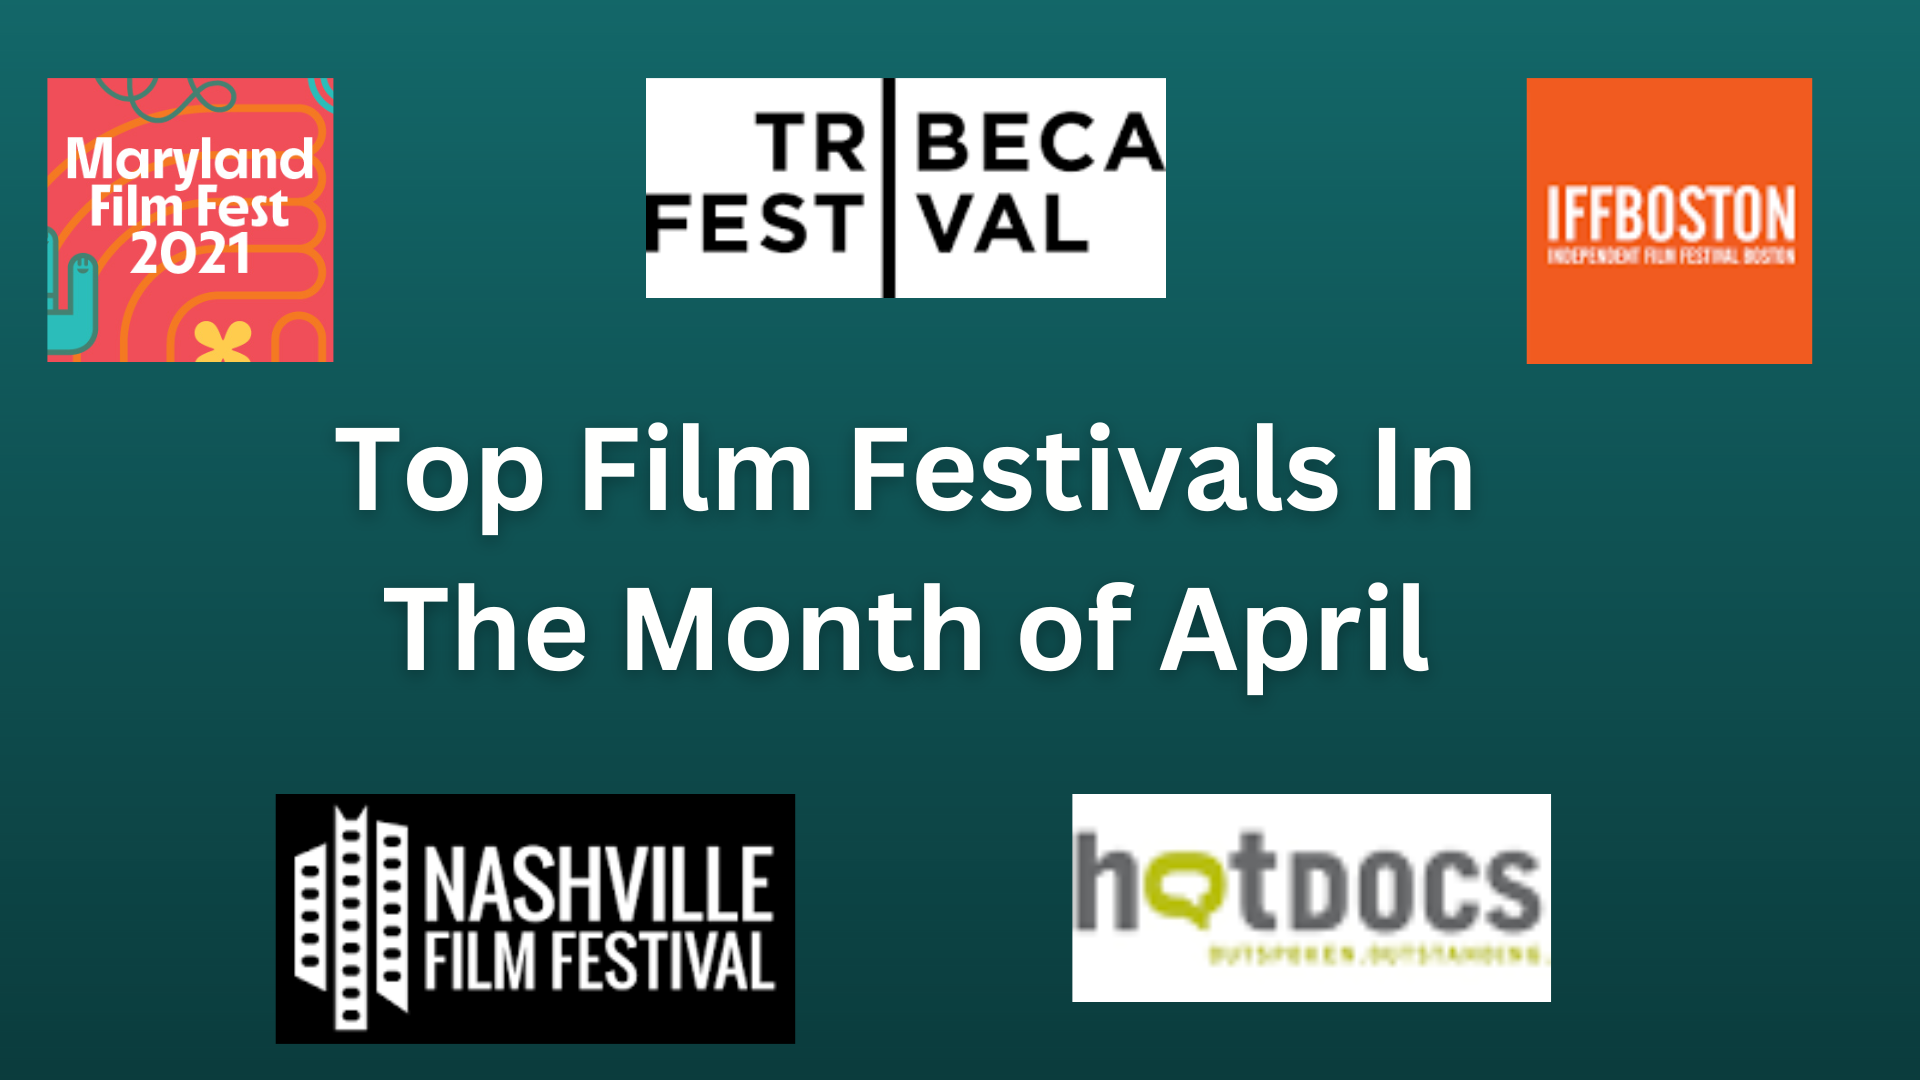 Top Film Festivals In The Month of April